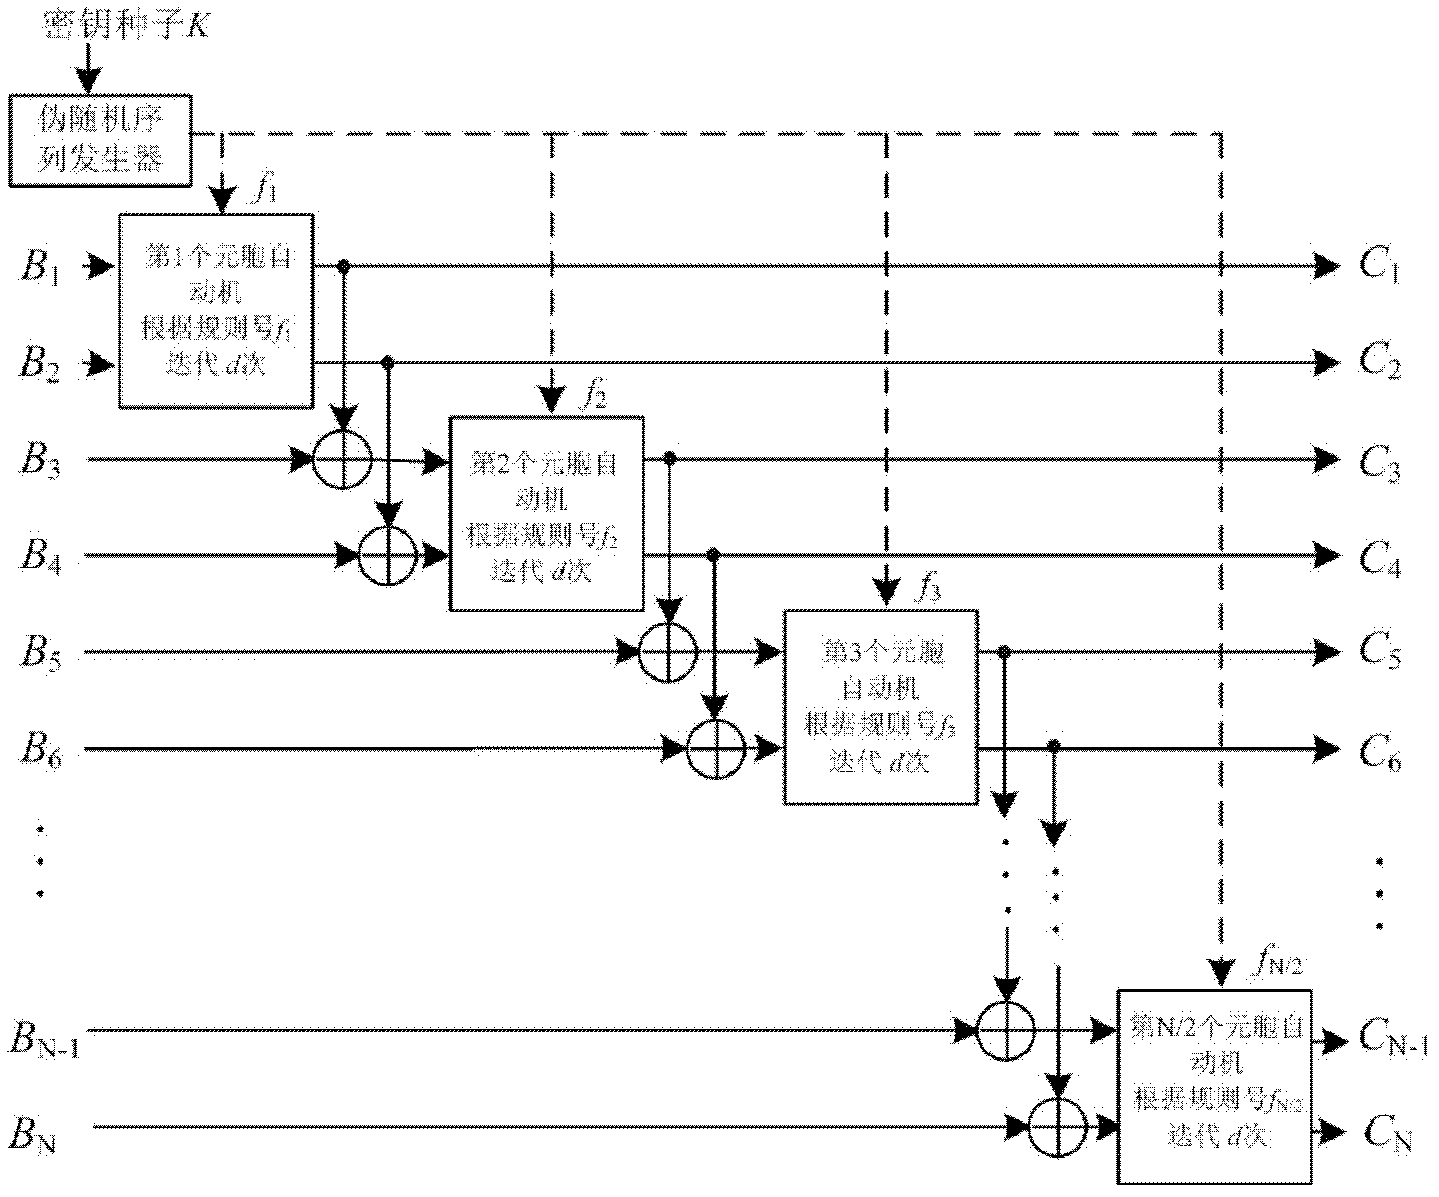 Method for encrypting and decrypting image based on cellular automata